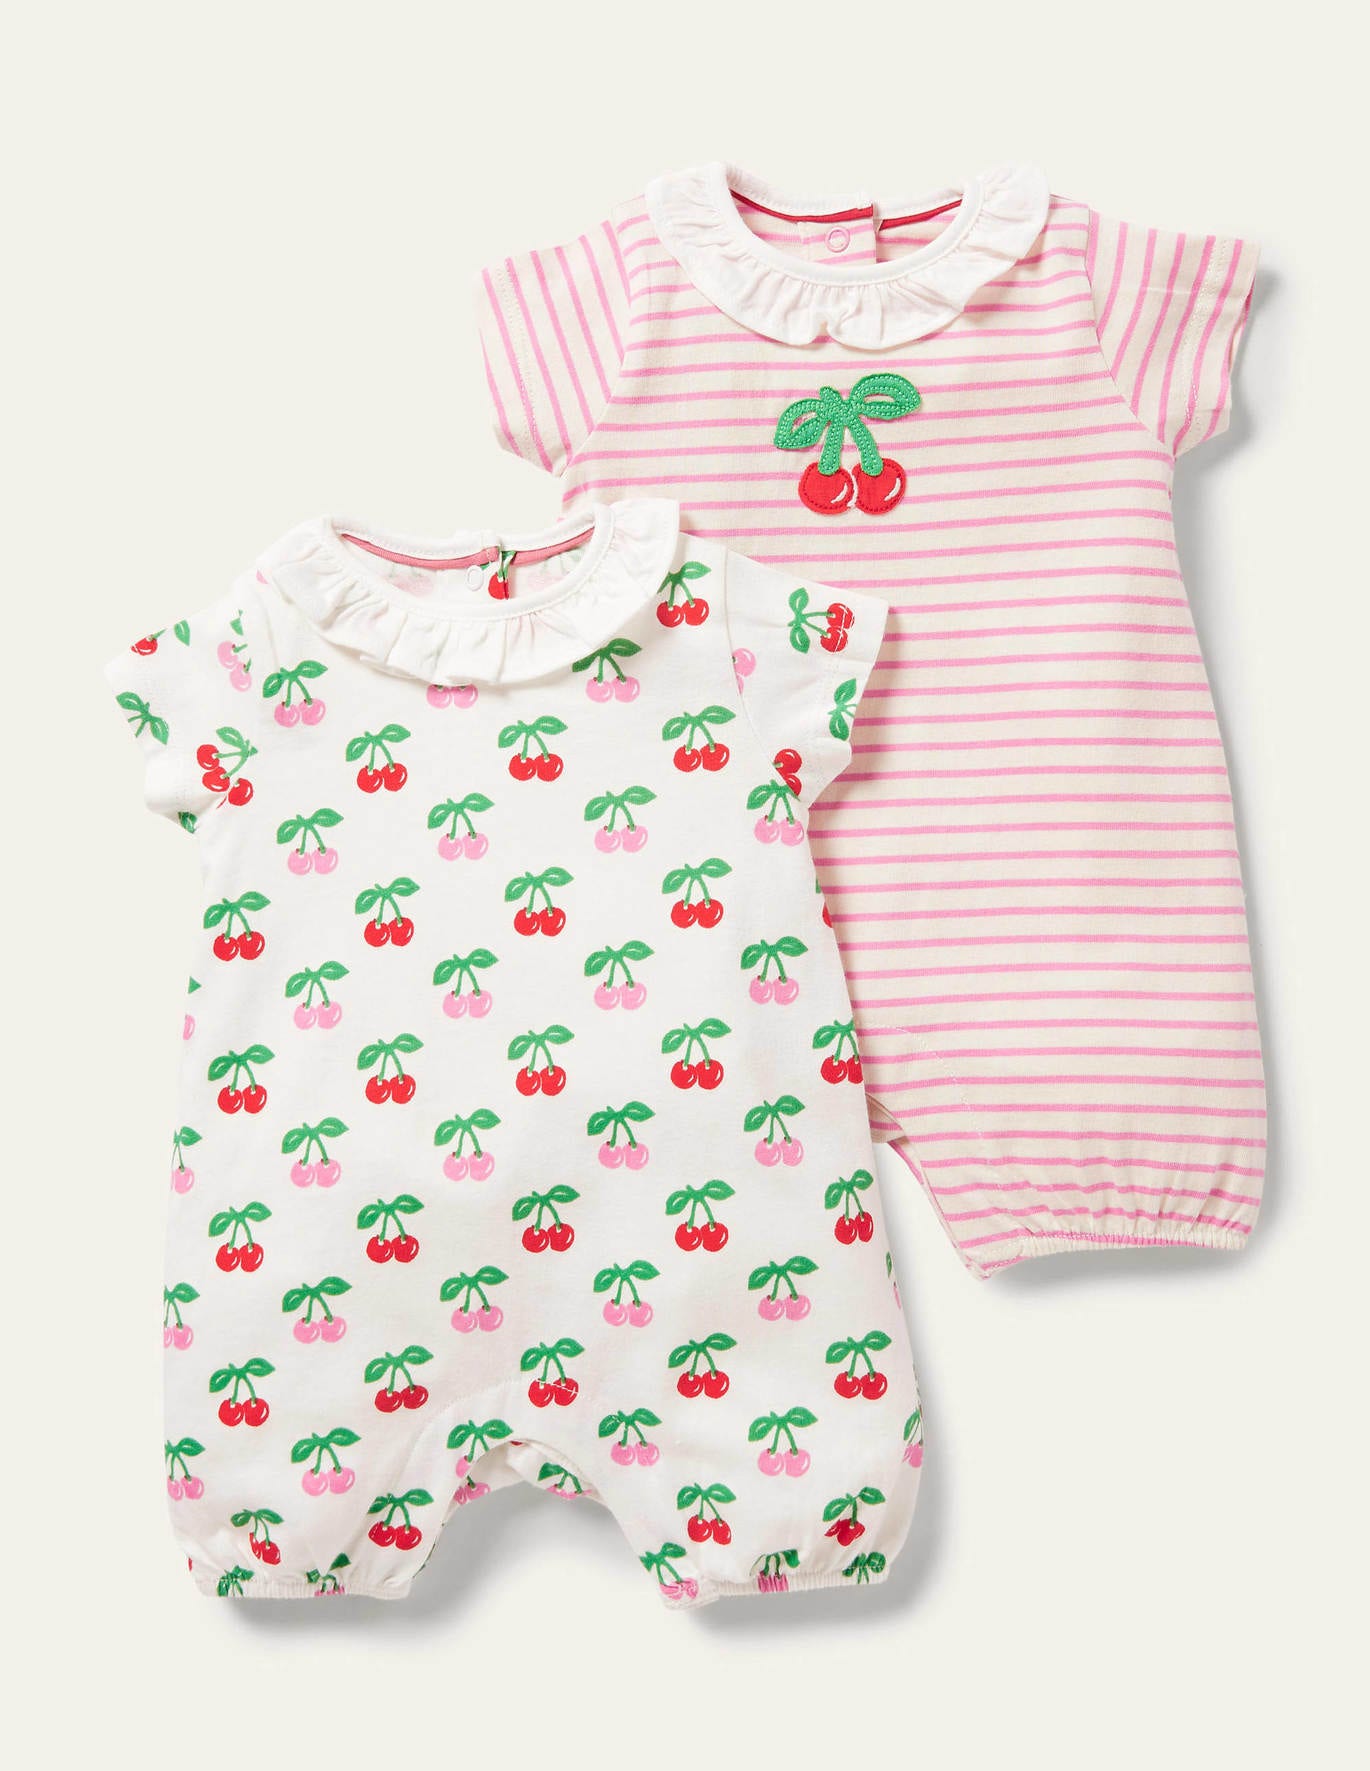 Boden Twin Pack Rompers - Ivory/Bright Petal Cherries